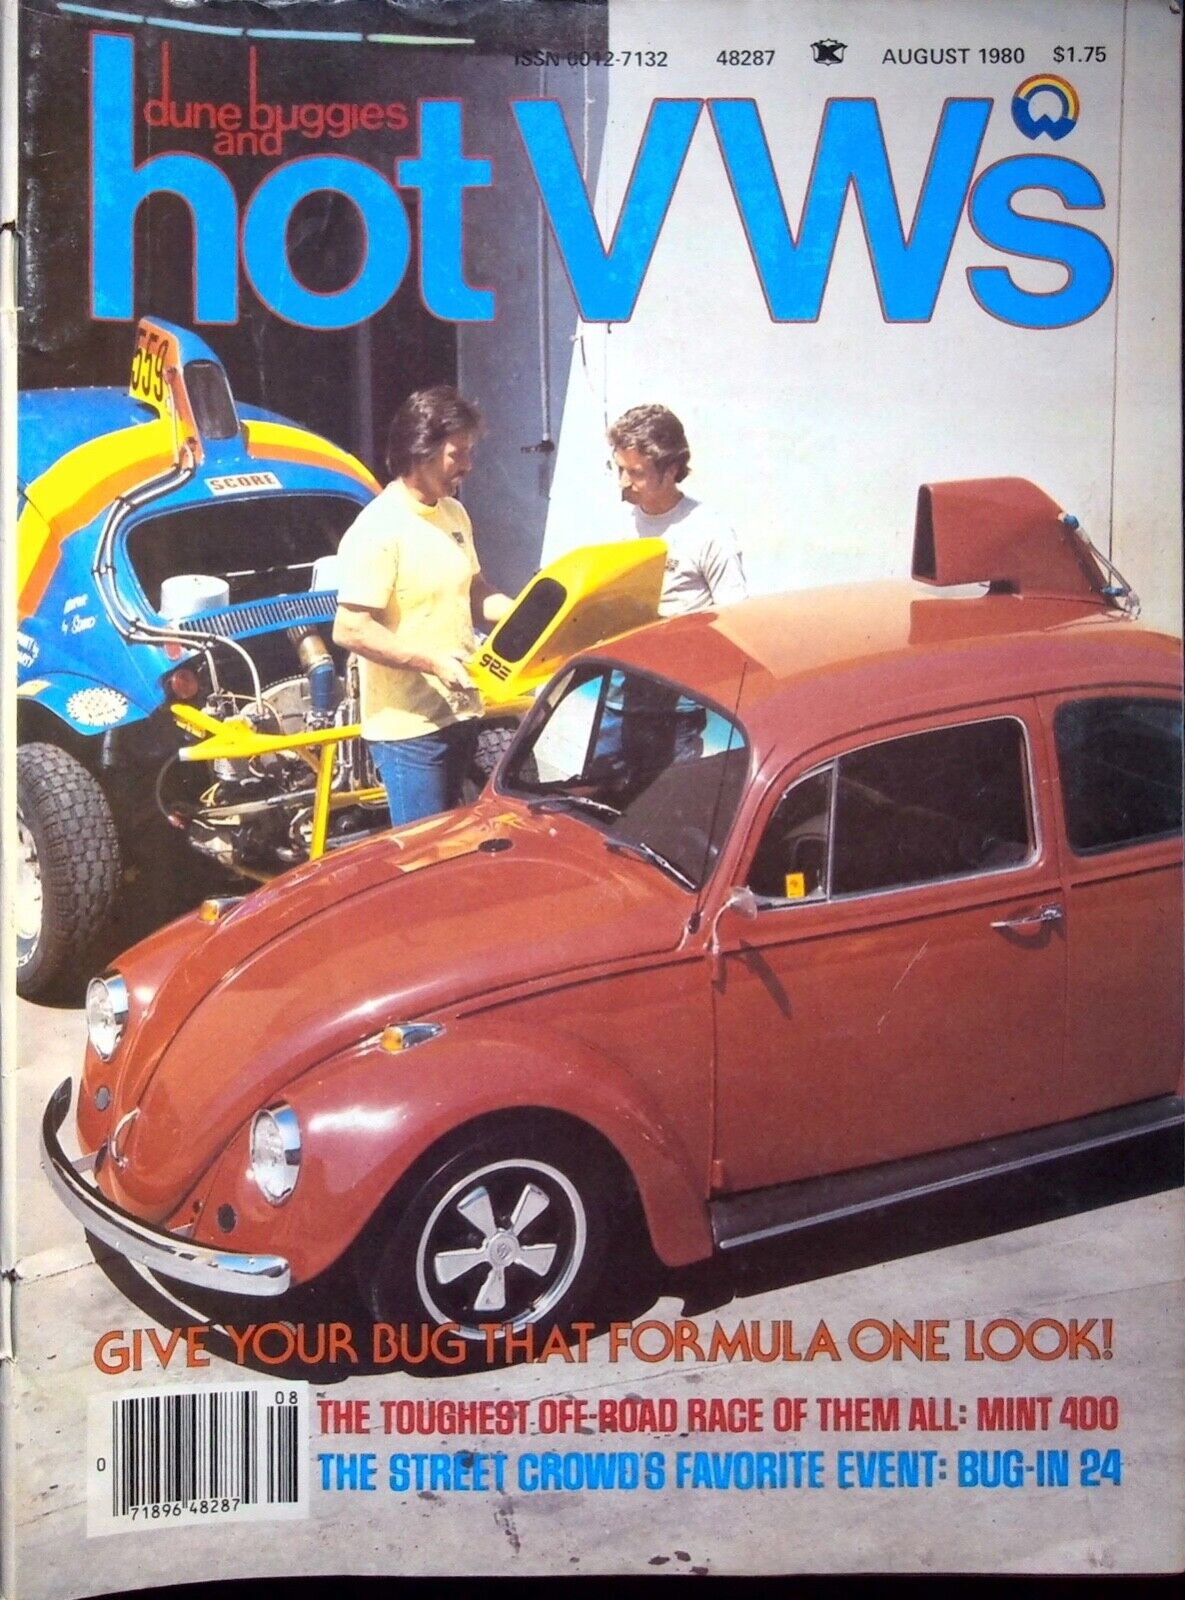 VINTAGE DUNE BUGGIES AND HOT VW\'S MAGAZINE, VOLUME 13, NUMBER 8. AUGUST 1980